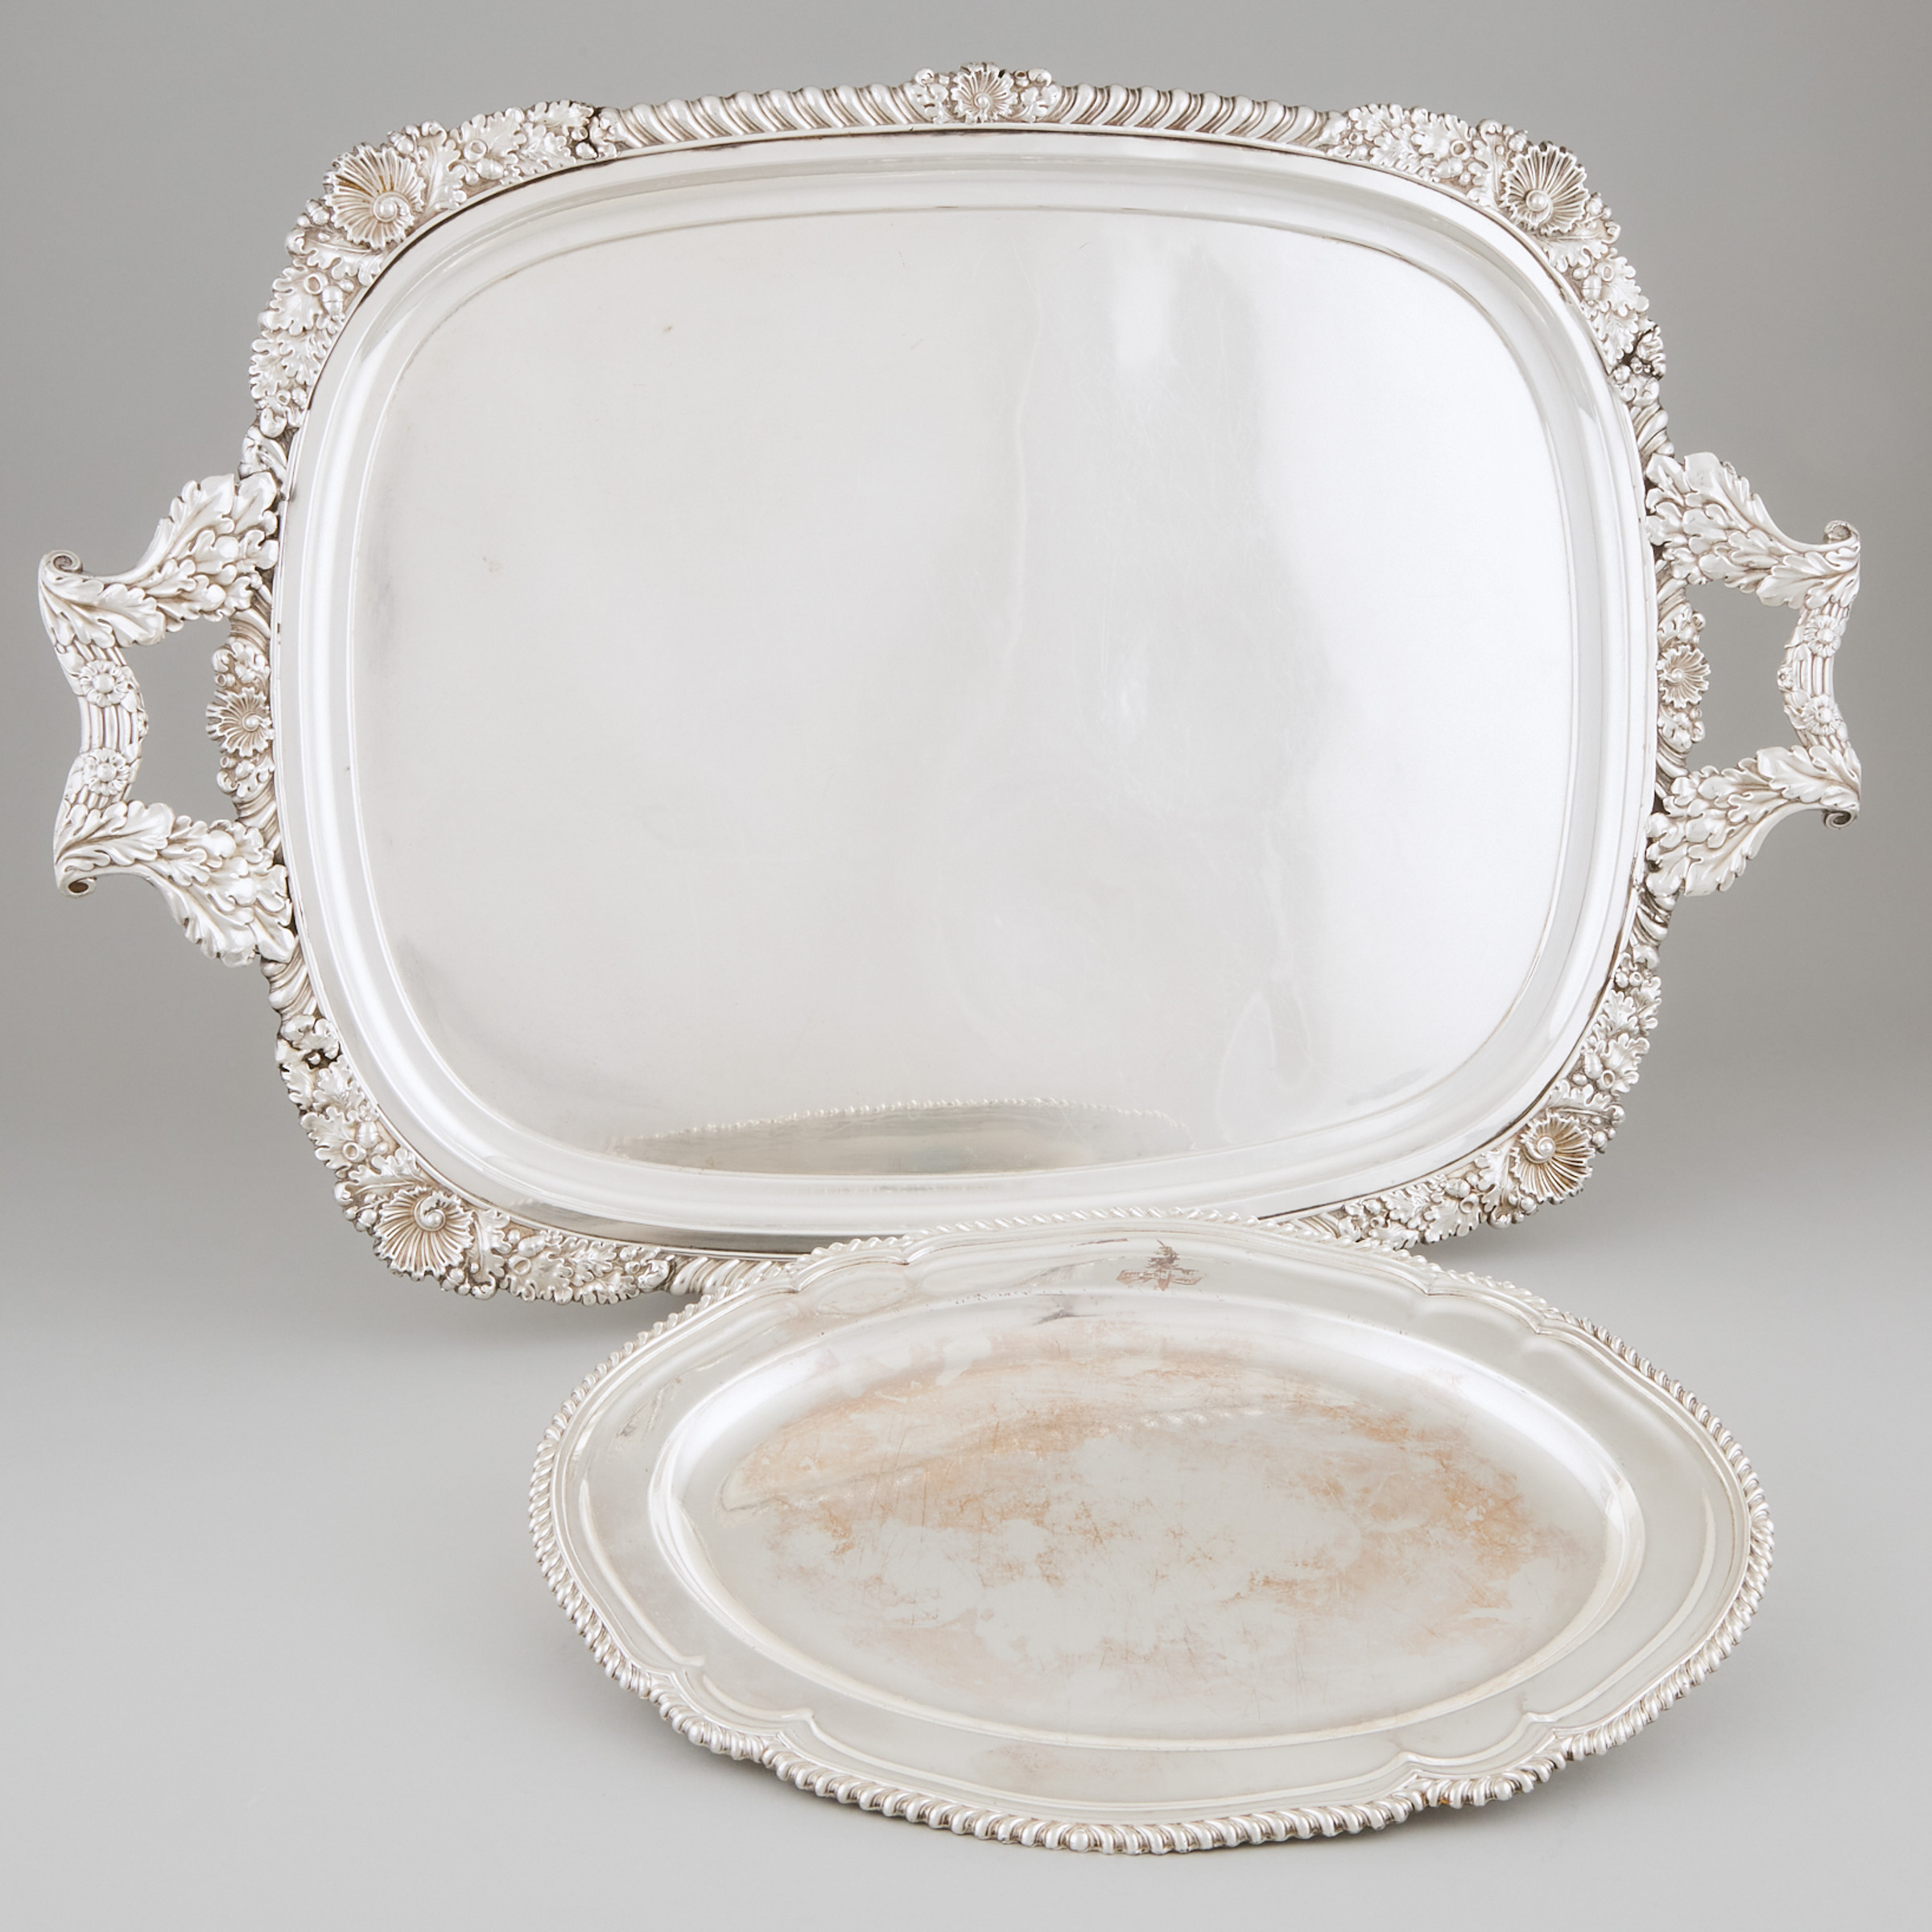 Old Sheffield Plate Two-Handled Serving Tray and an Oval Platter, c.1825